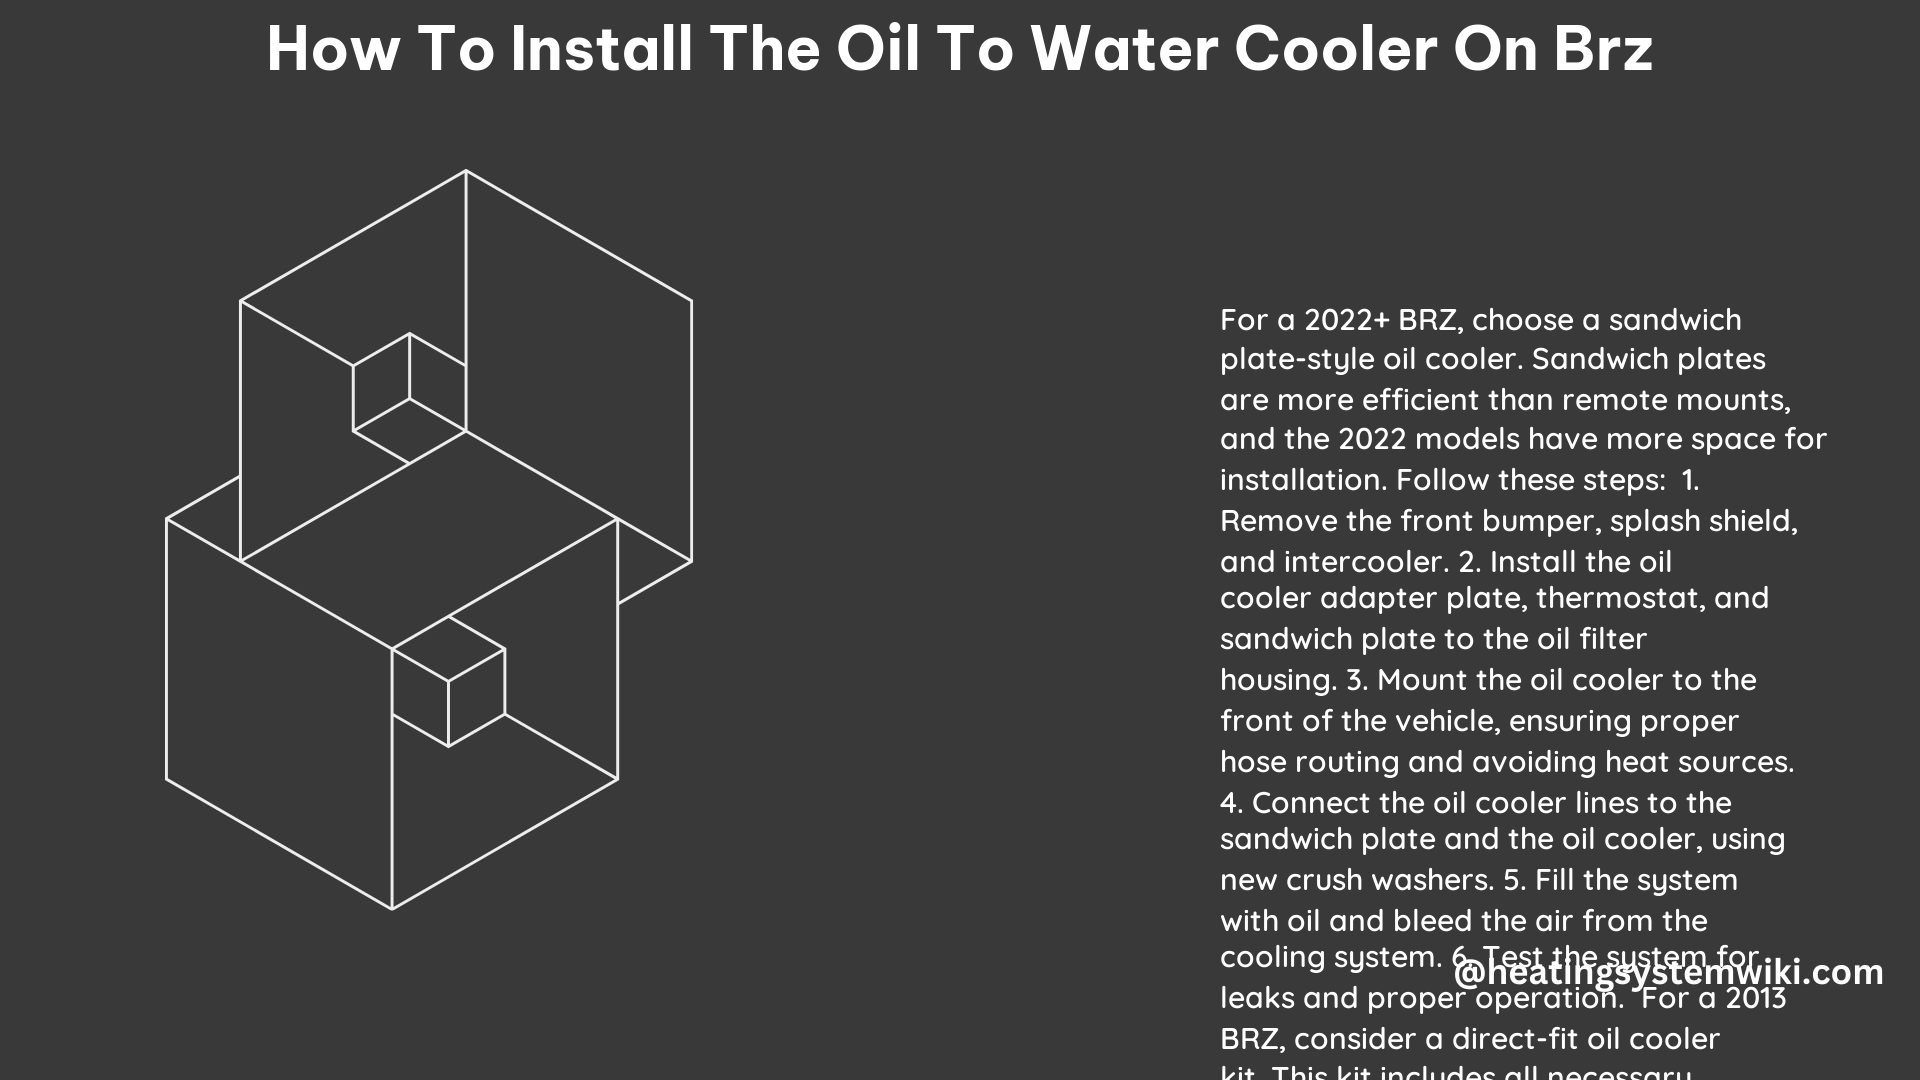 How to Install the Oil to Water Cooler on Brz